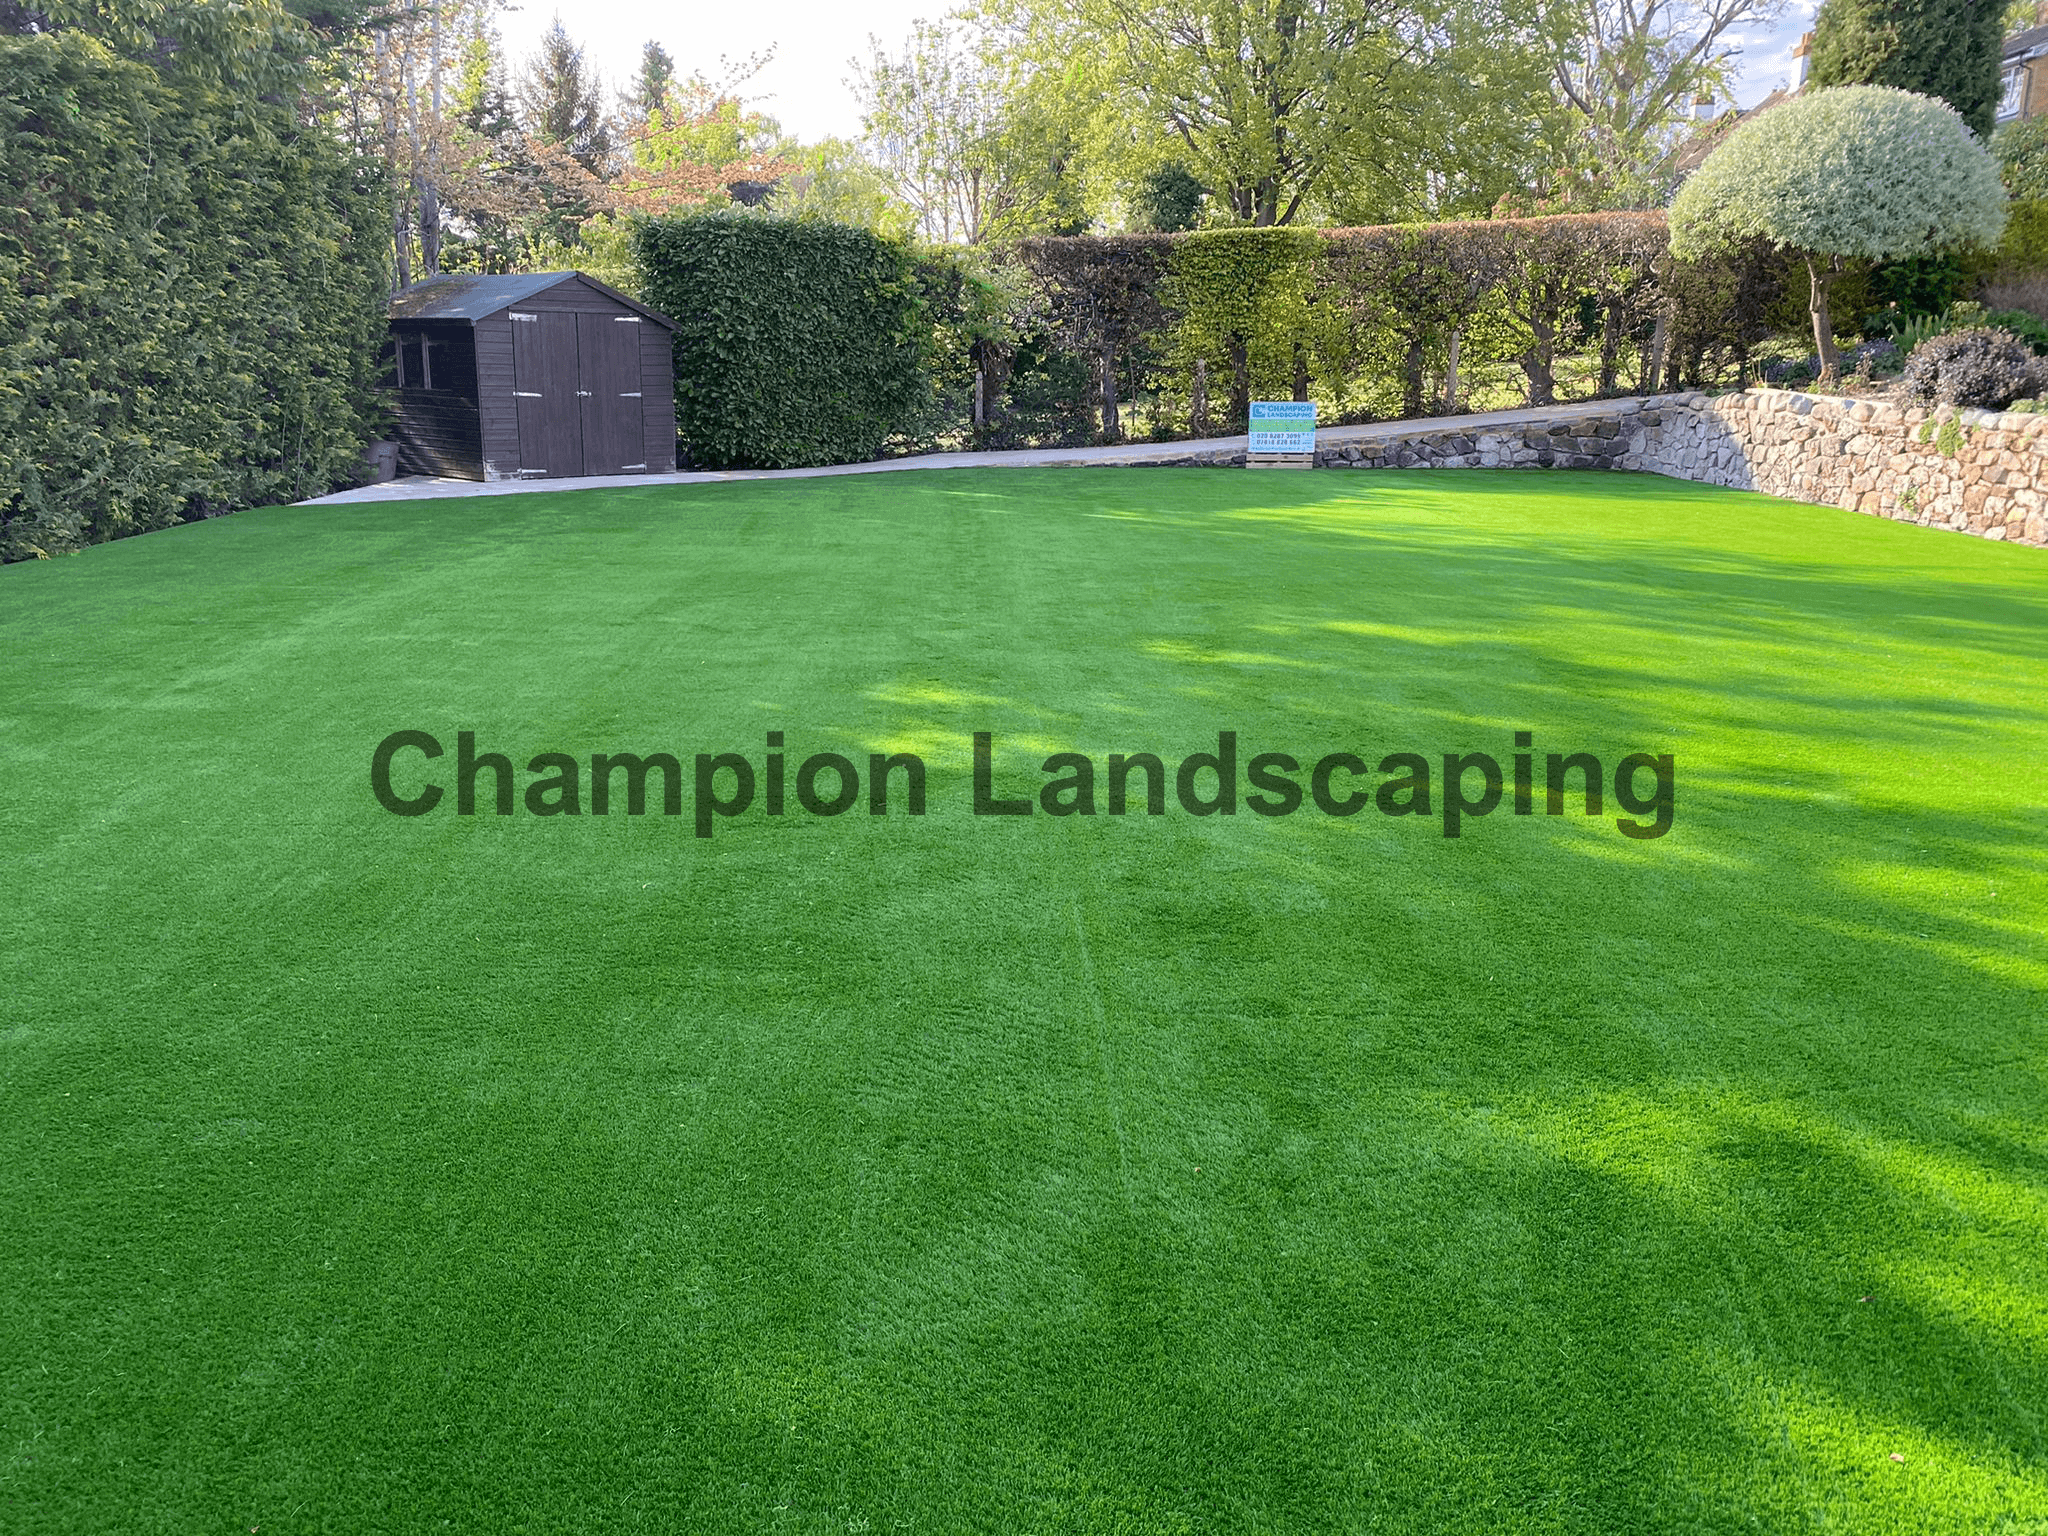 https://www.championlandscaping.co.uk/wp-content/uploads/2020/12/Lawn-Turfing-3.png